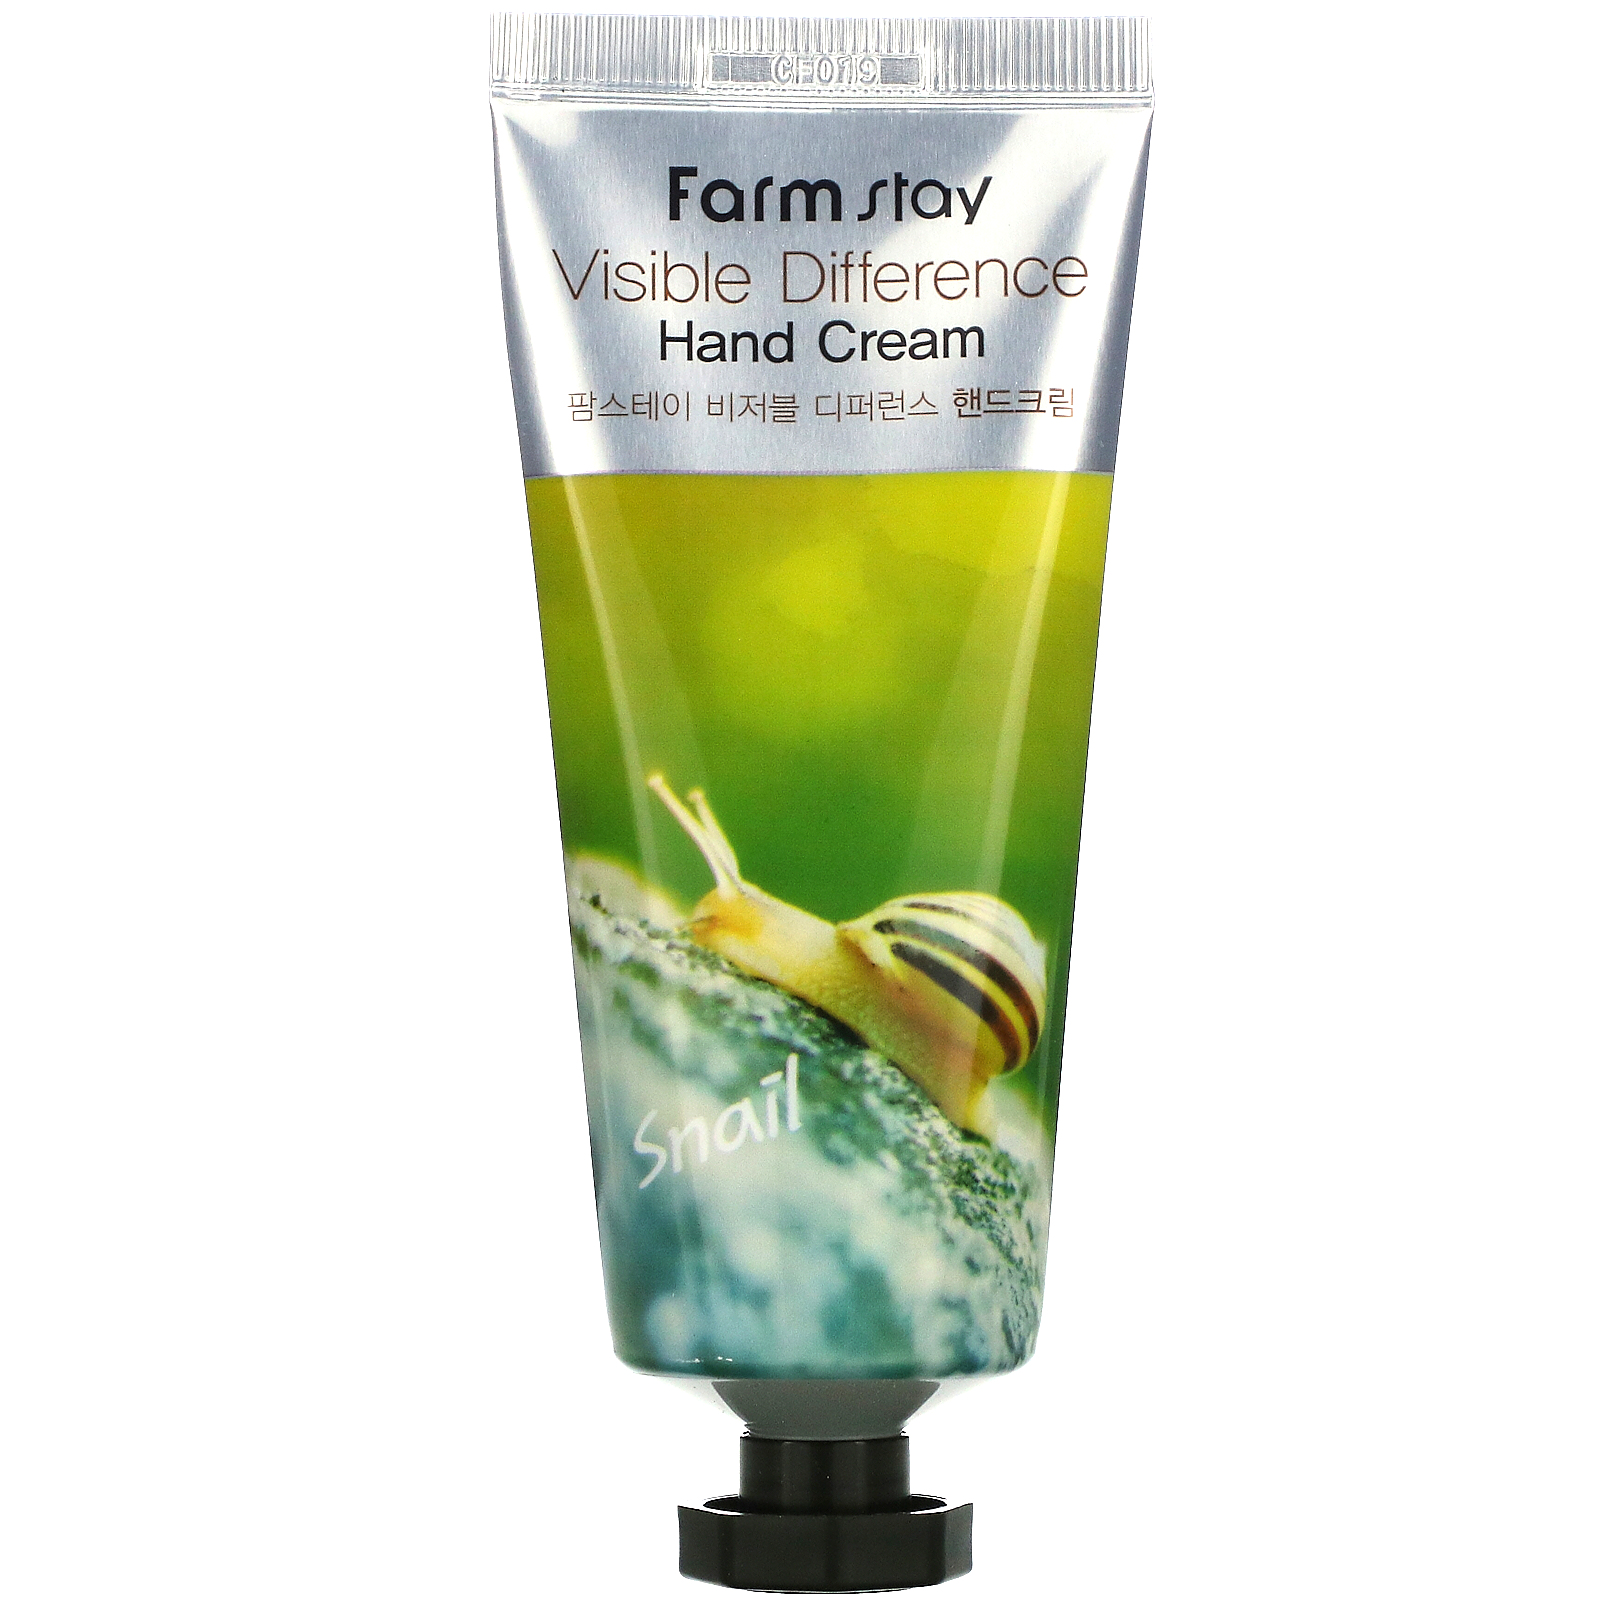 Farmstay, Visible Difference Hand Cream, Snail, 100 g